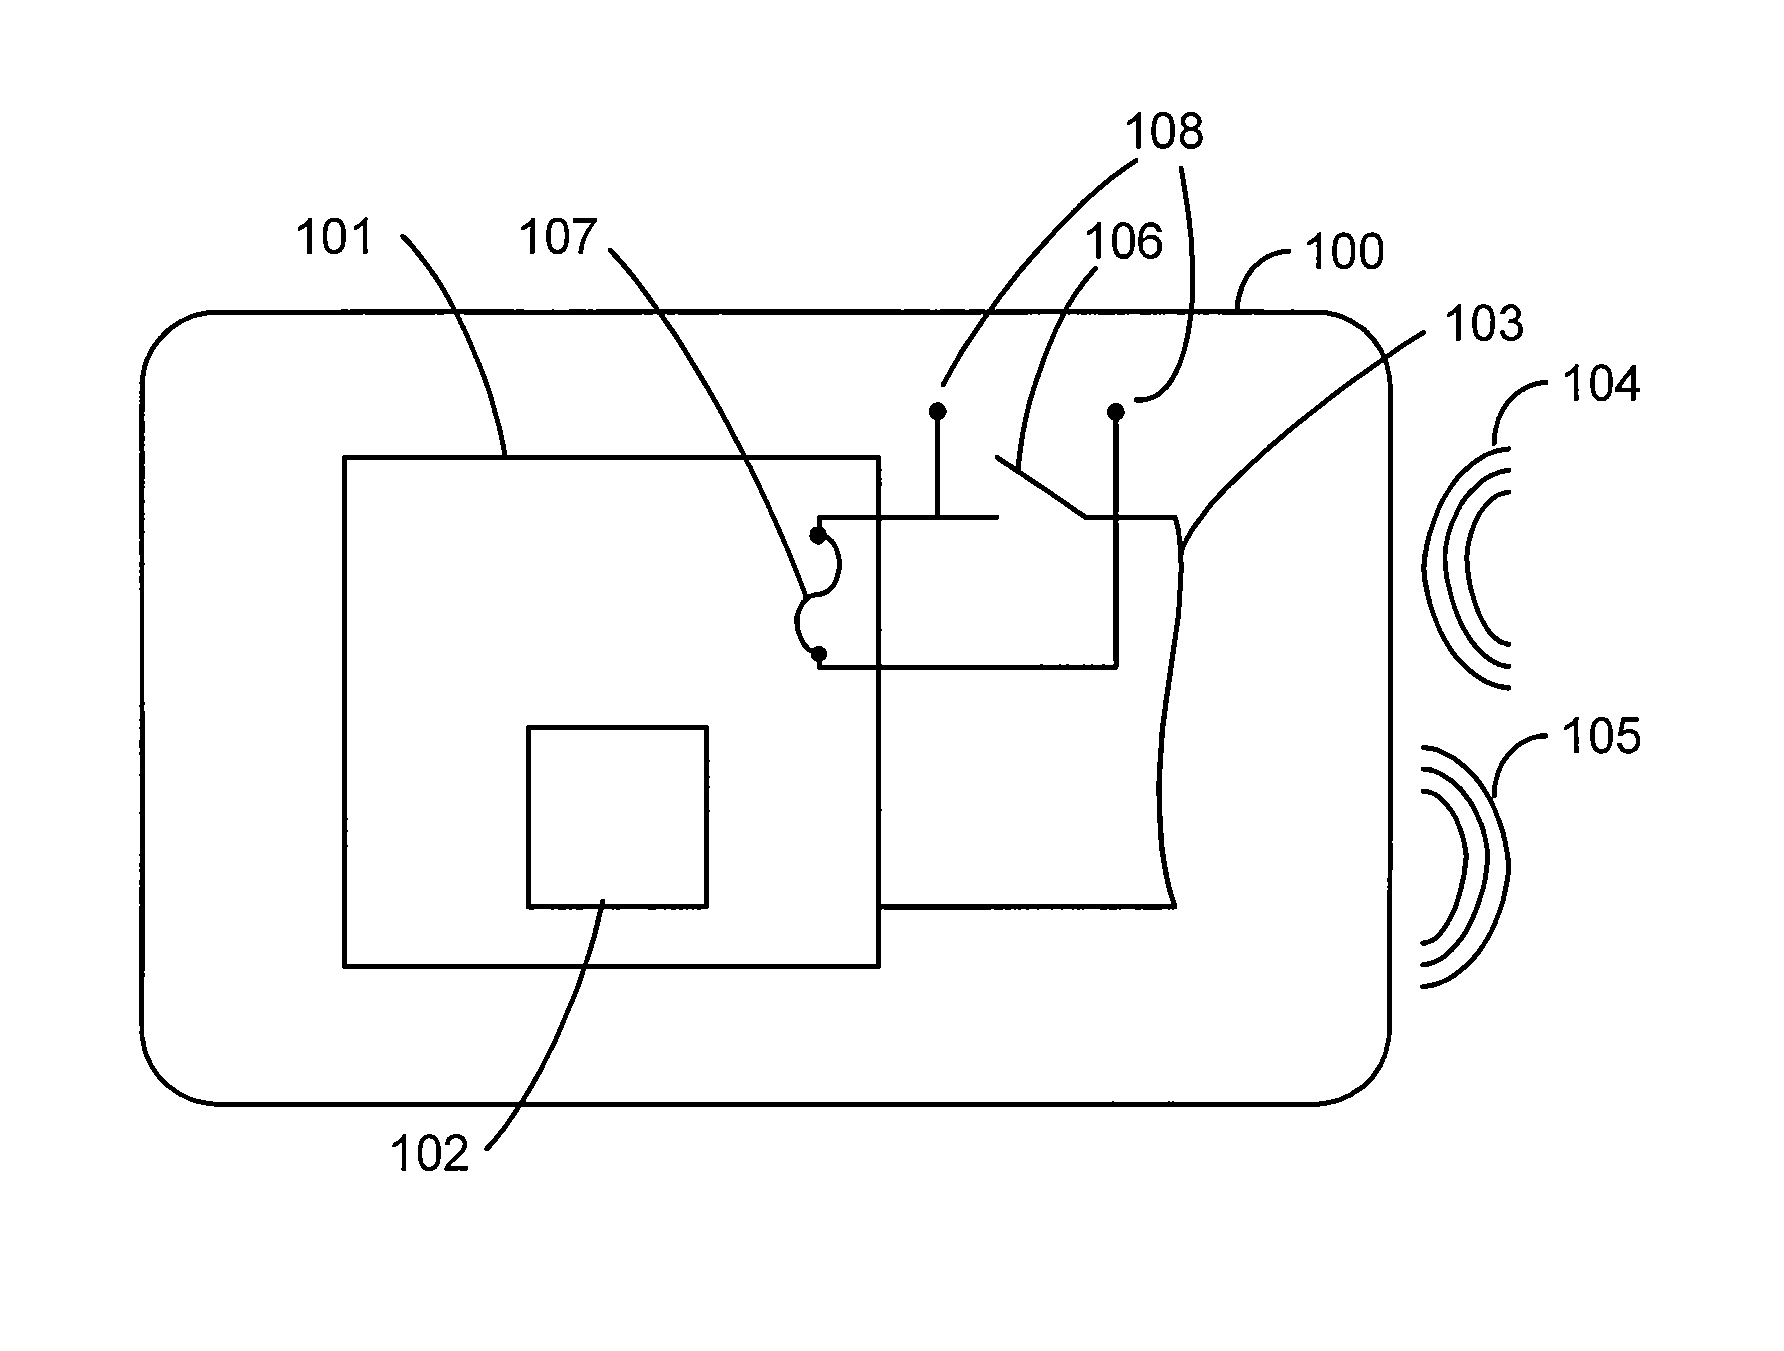 Manufacturing system to produce contactless devices with switches